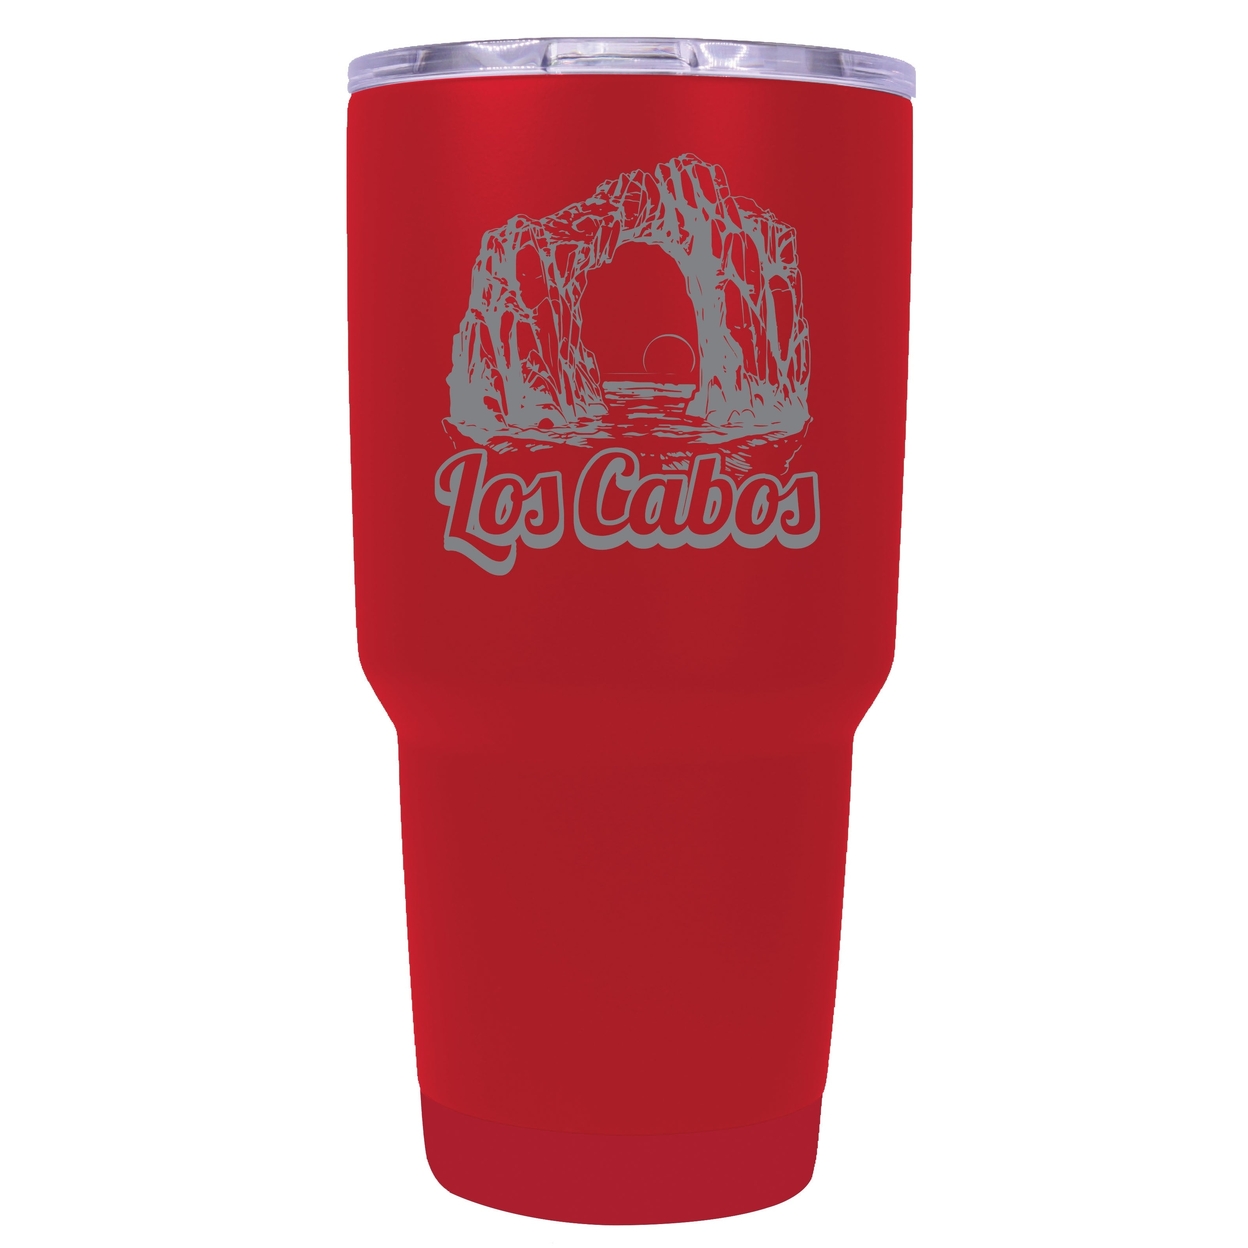 Los Cabos Mexico Souvenir 24 Oz Engraved Insulated Stainless Steel Tumbler - Green,,Single Unit